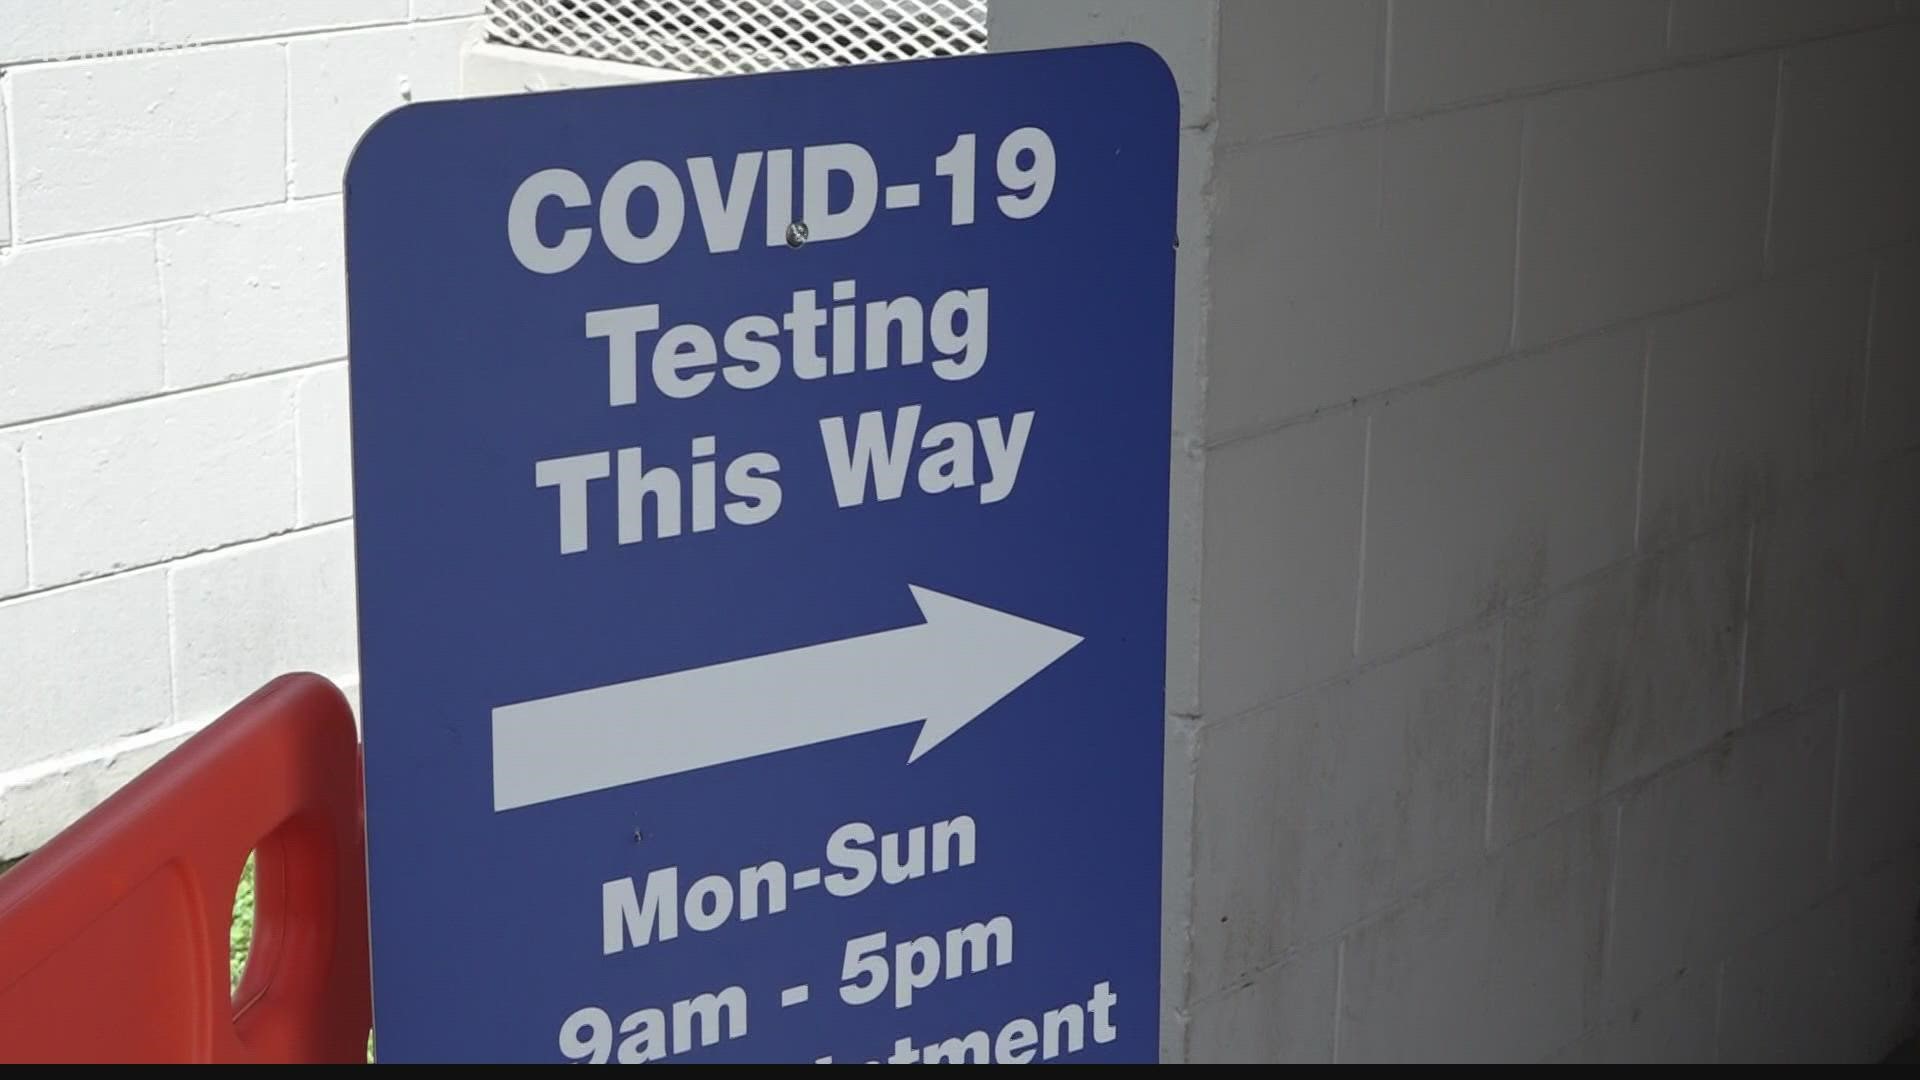 Under federal law, insurance companies have to cover the cost of COVID tests ordered by a medical provider. But workplace testing is exempt